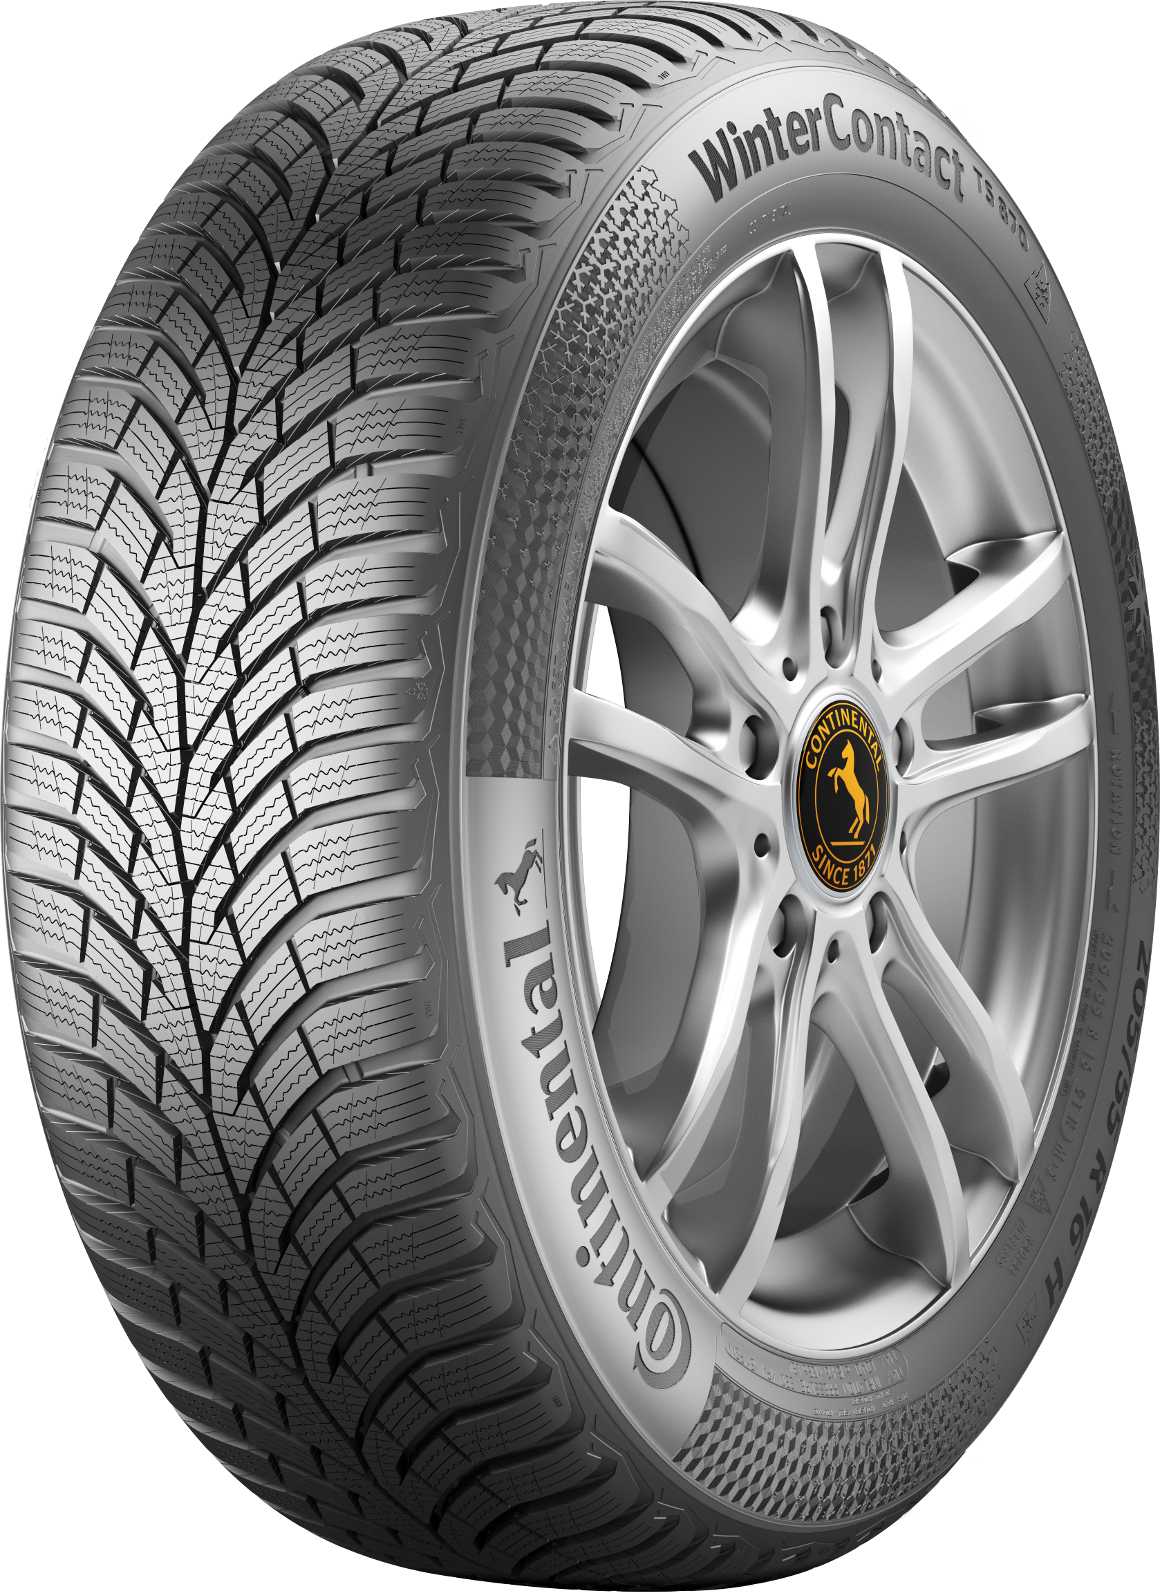    Continental Winter Contact TS870 215/60 R16 